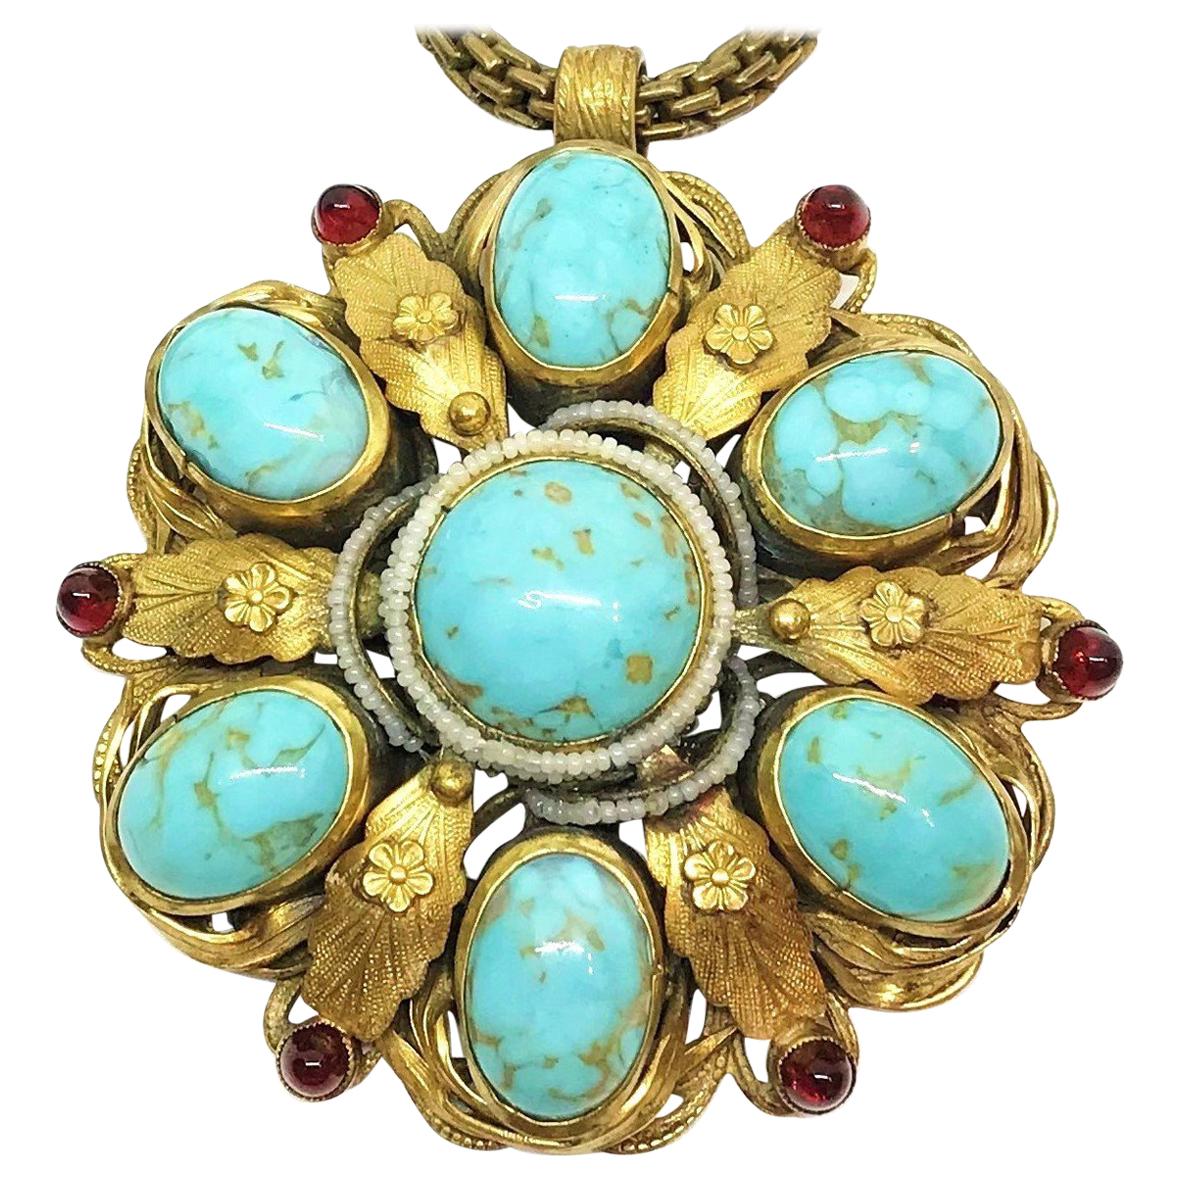 Circa 1940s Ernest Steiner Jeweled Pendant Necklace For Sale